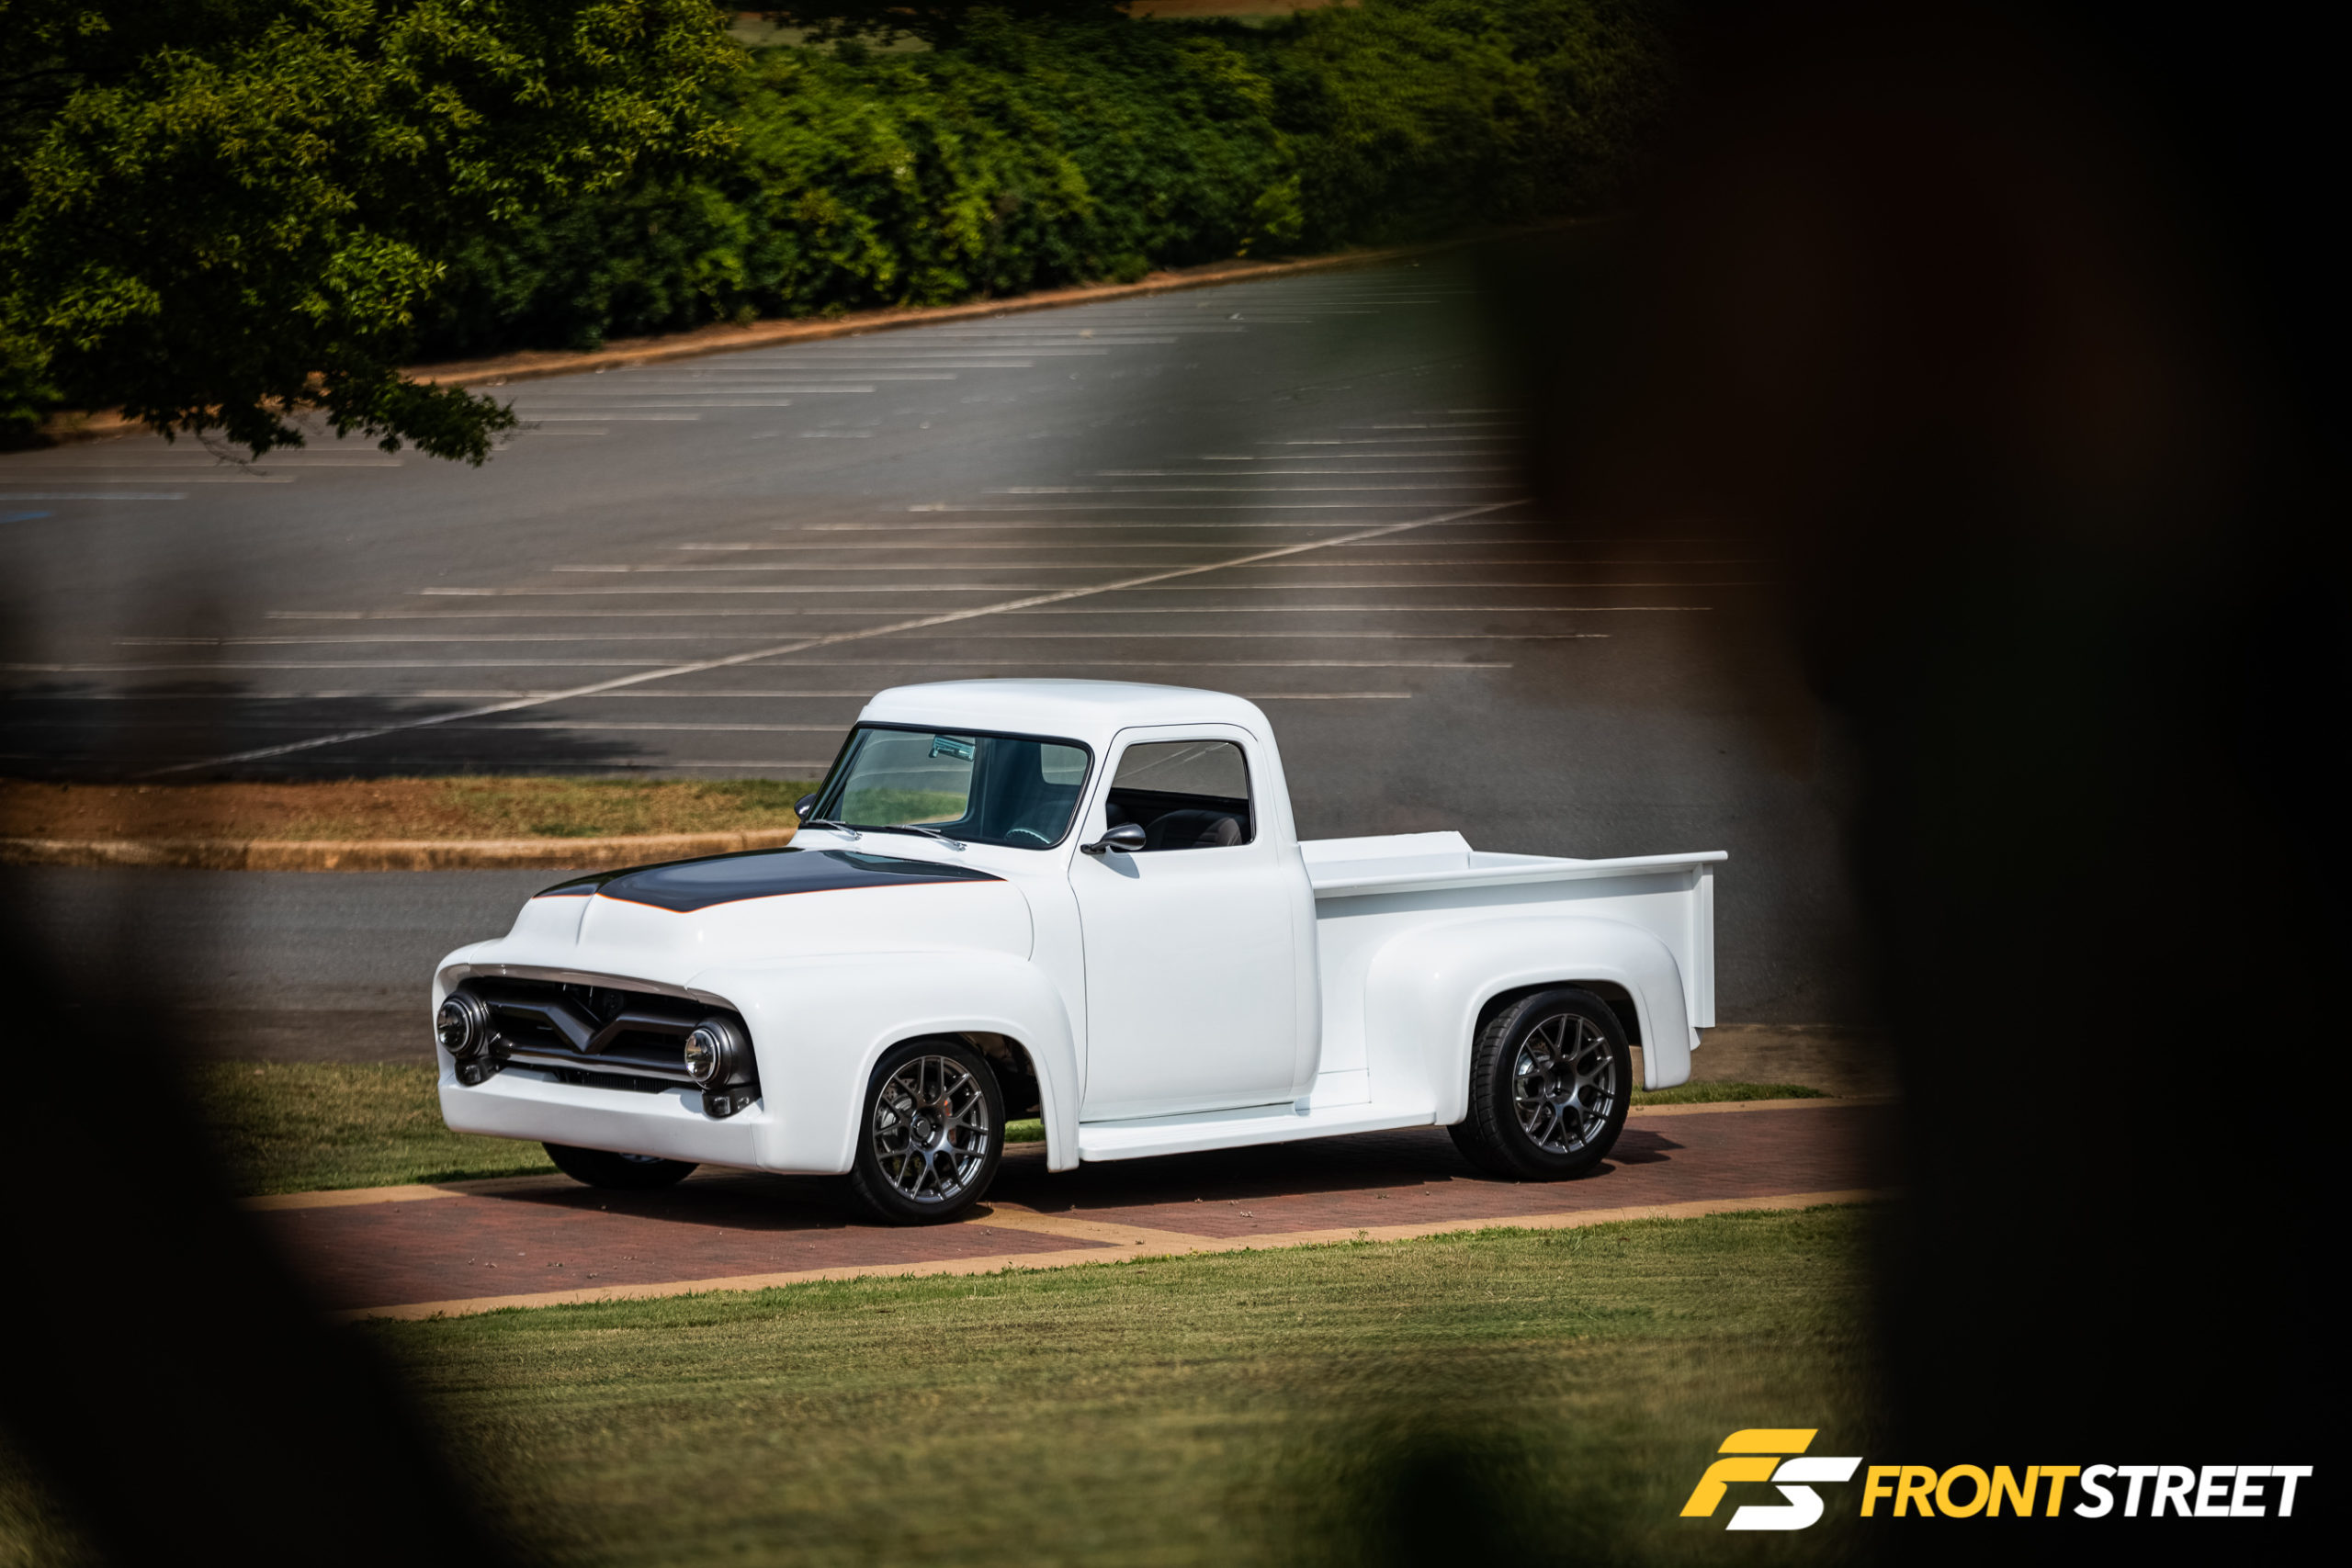 There's A Secret Lurking Under The Hood Of This Fat Fender Ford F-100